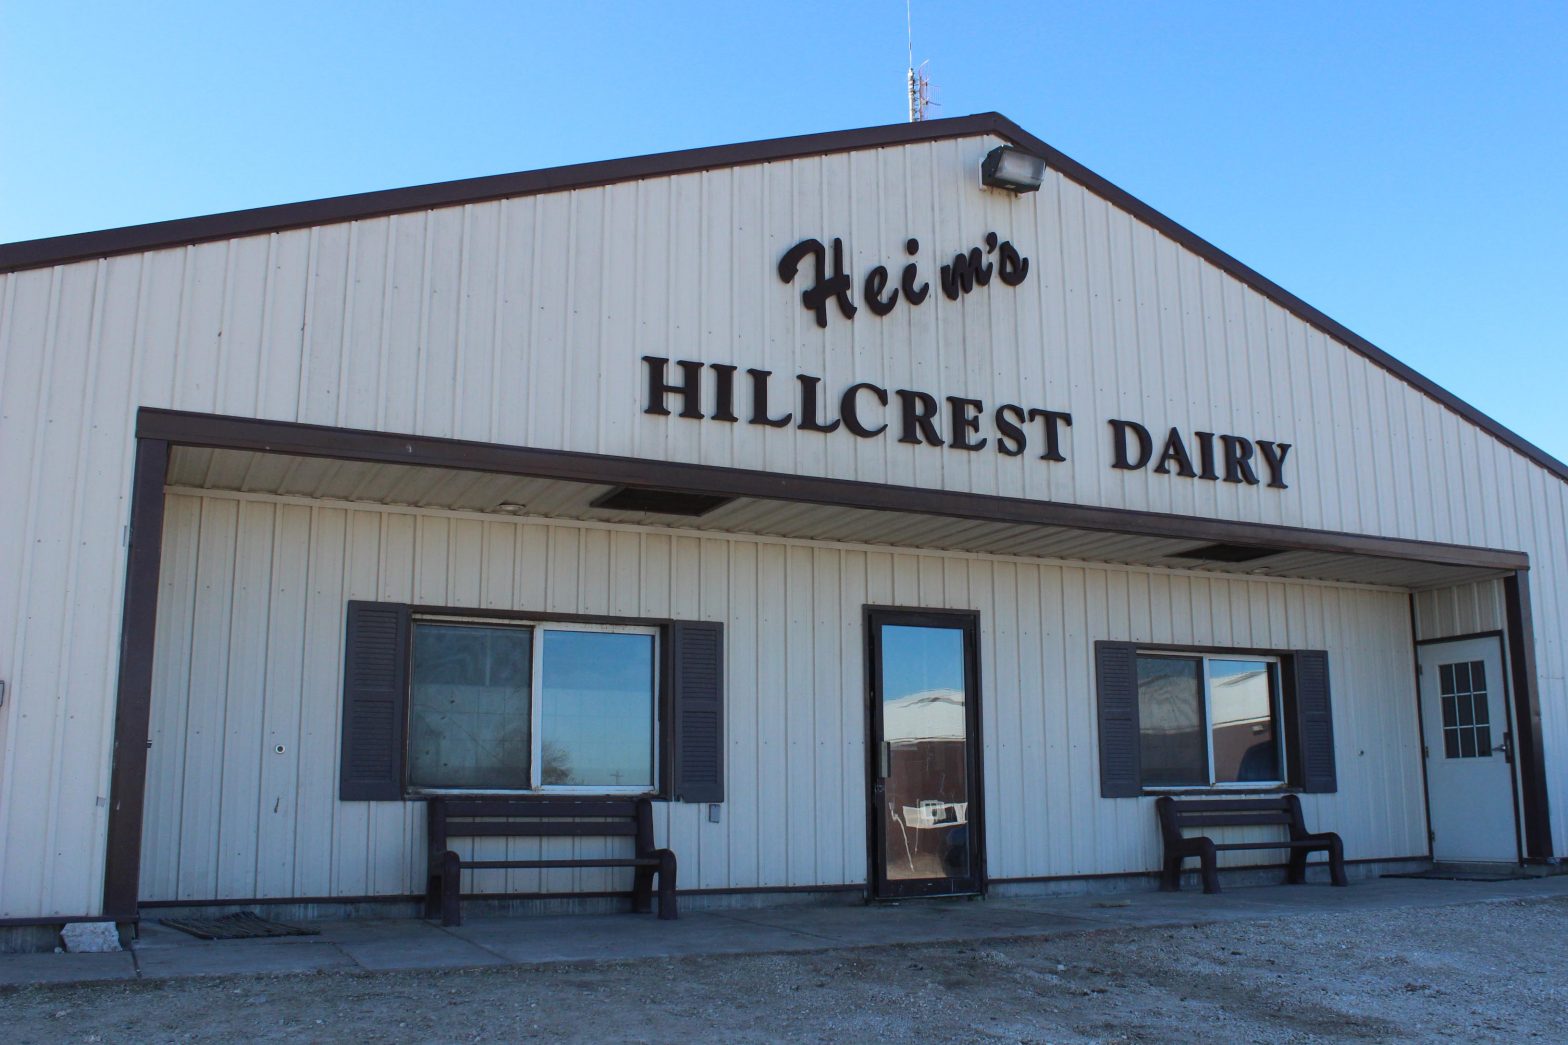 Heim’s Hillcrest Dairy LLC is owned and operated by Jeremy and Scott Heim, along with their parents, Lloyd and Joyce.  They milk about 600 cows and run 1,300 acres in Algoma, Wisconsin.